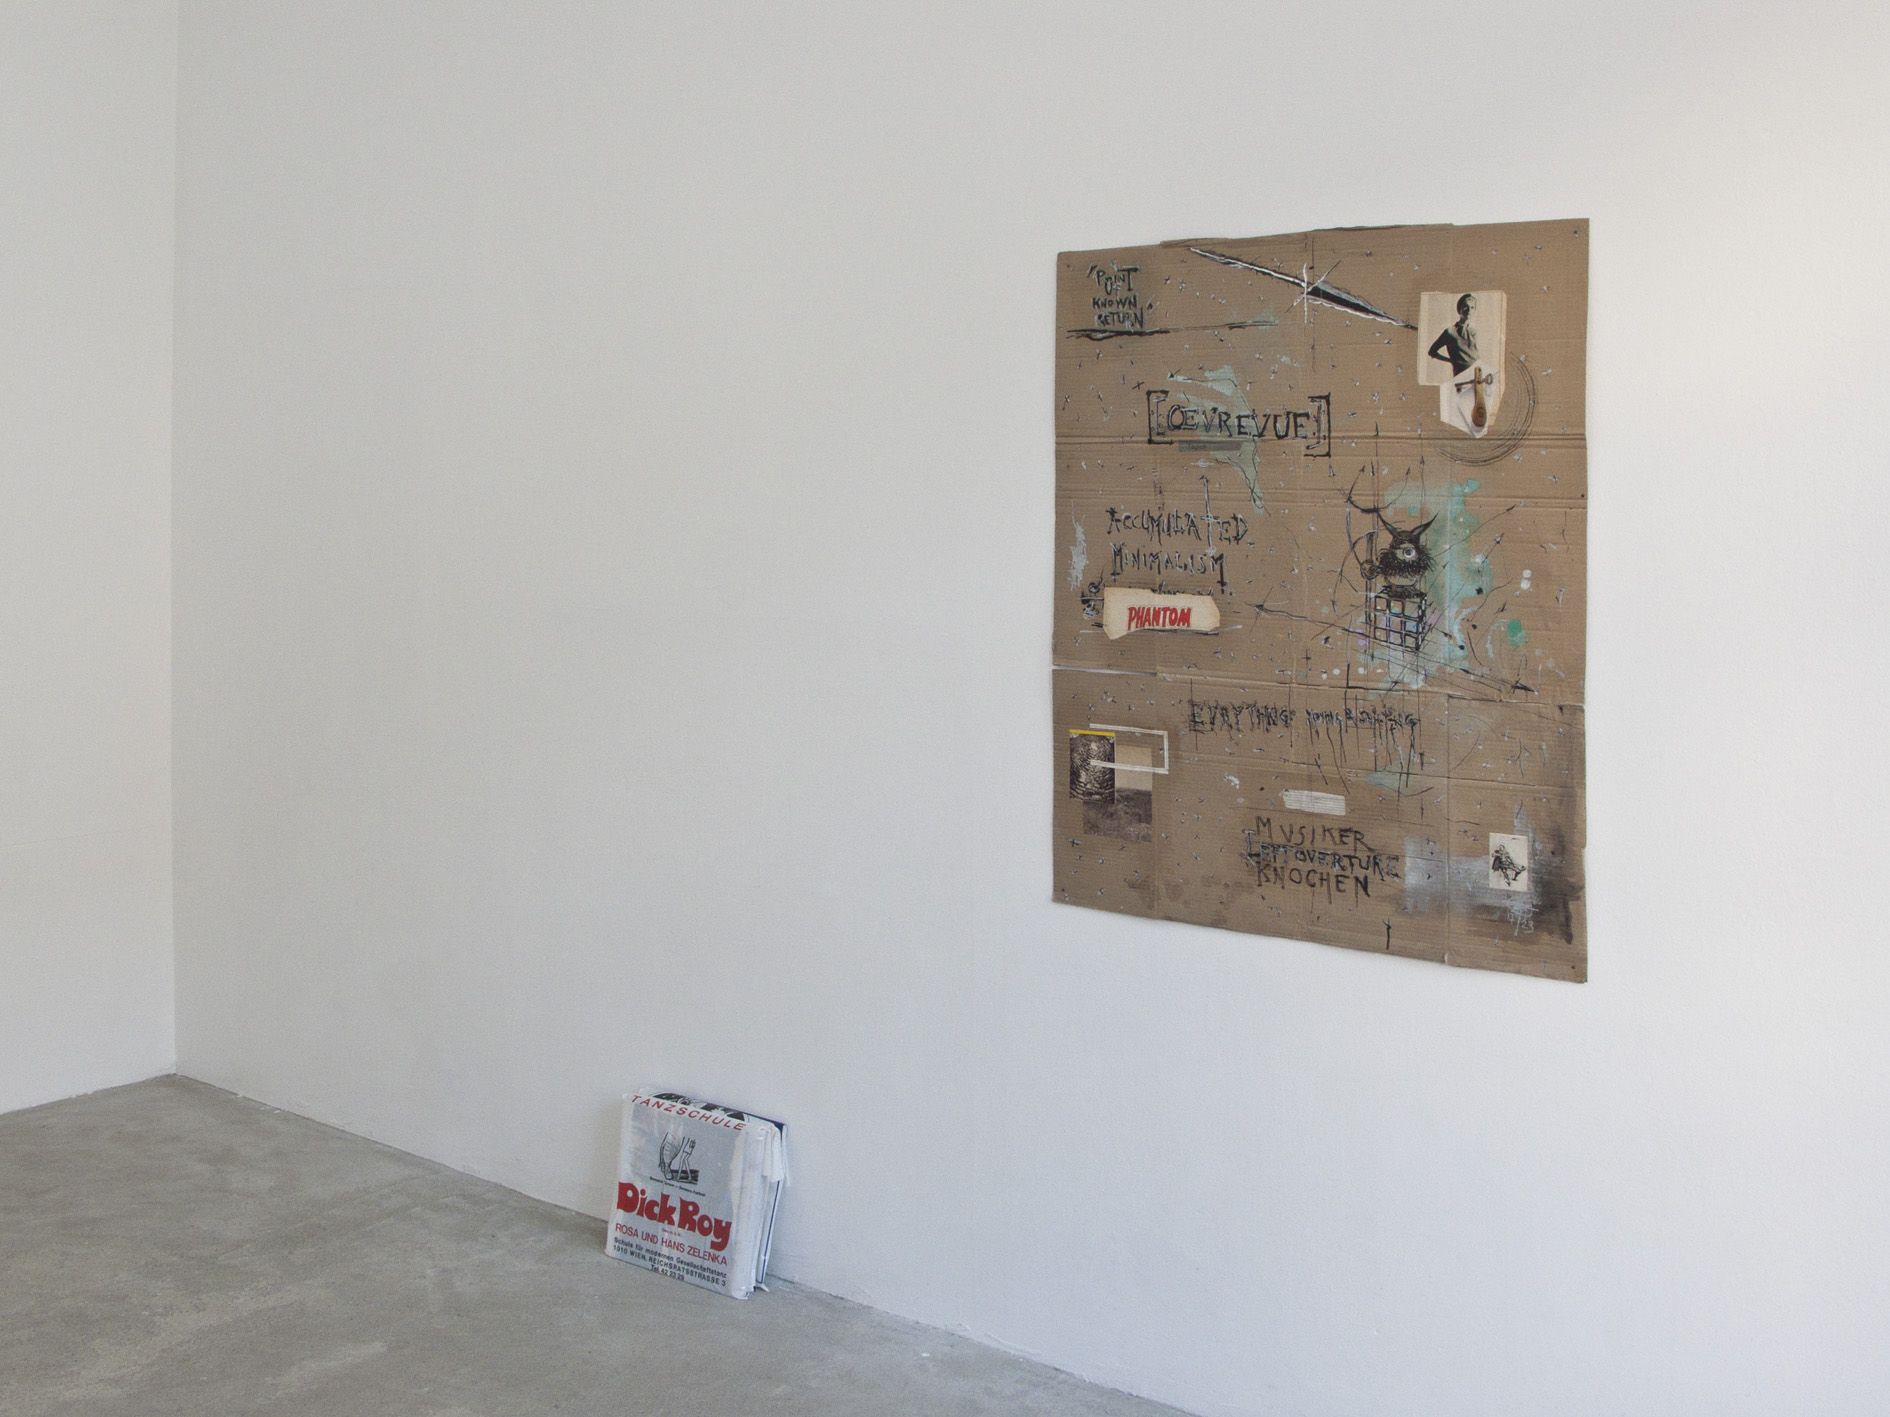 Michael Gumhold at L-project